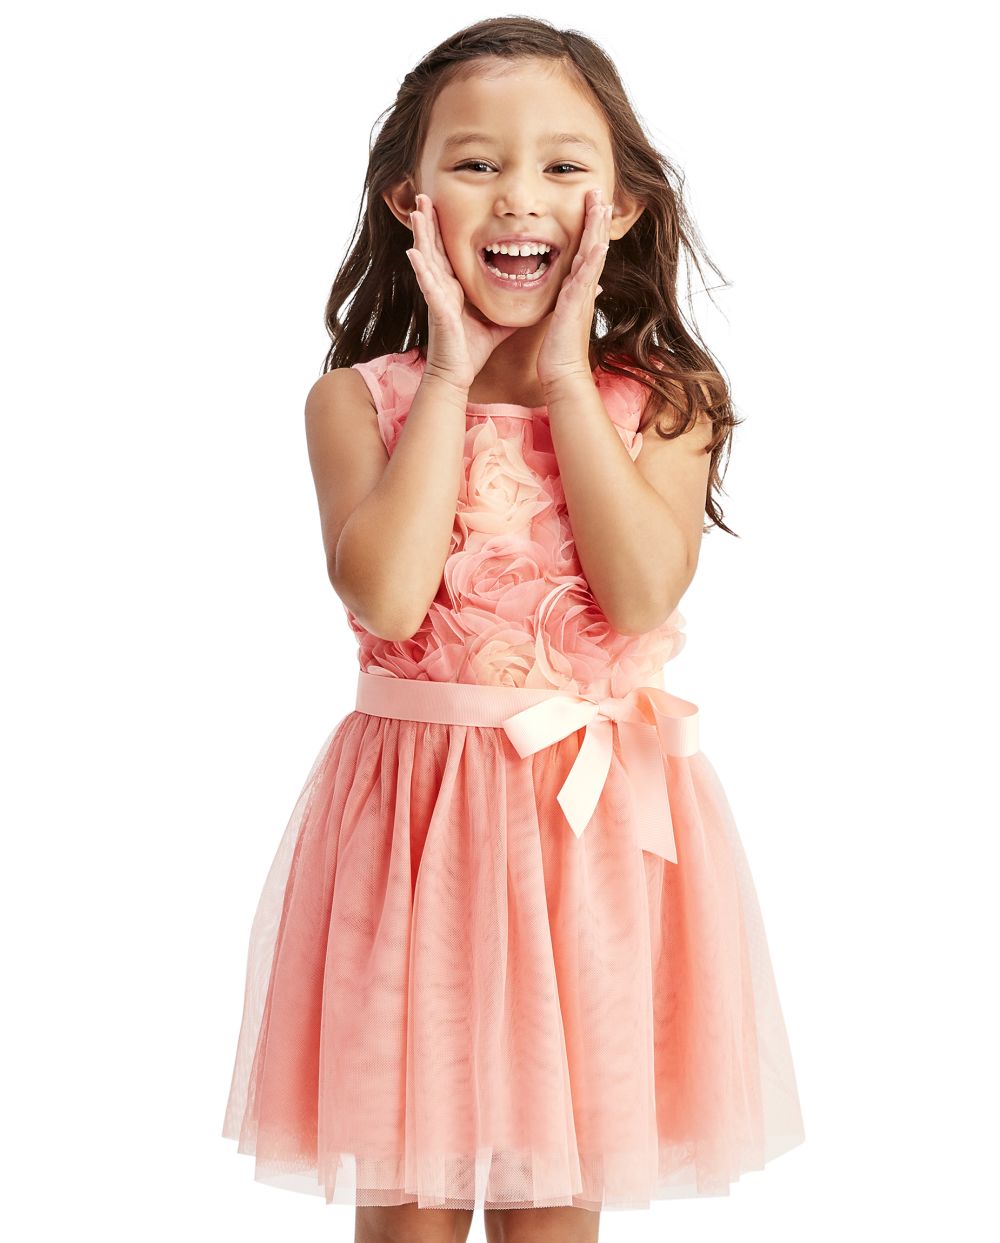 Toddler Above the Knee Sleeveless Mesh Dress With a Ribbon by The Children Place